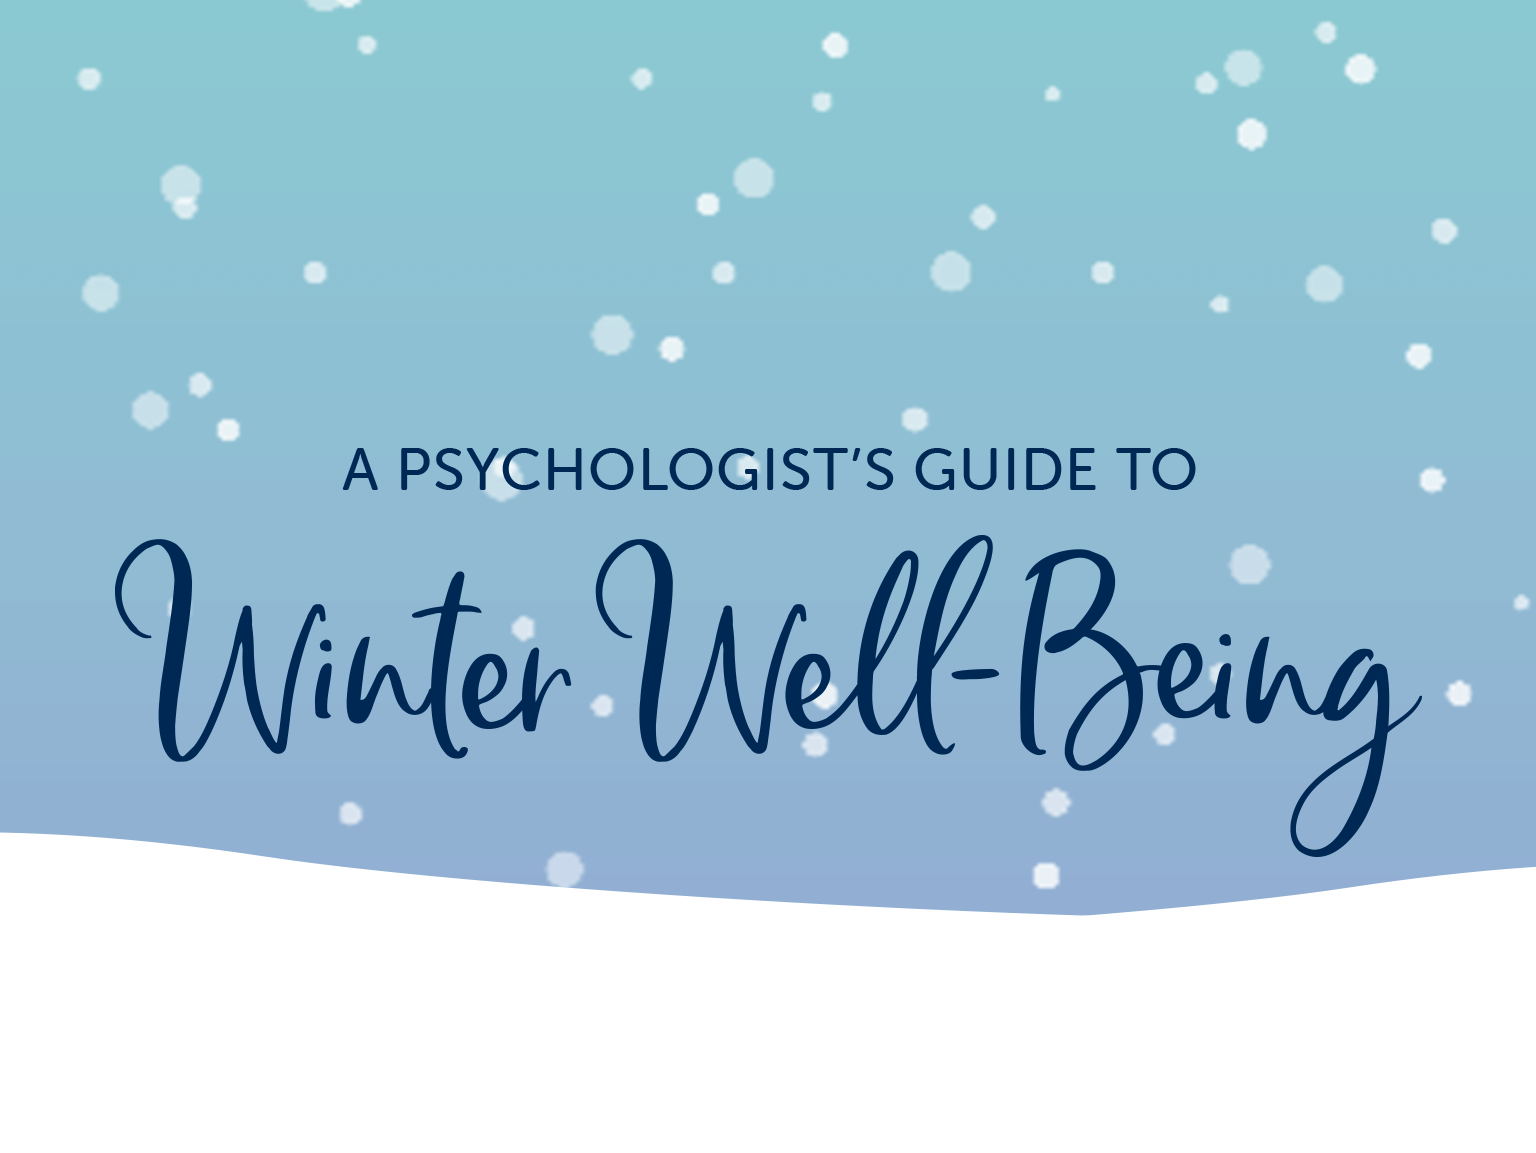 A psychologist's guide to winter well-being